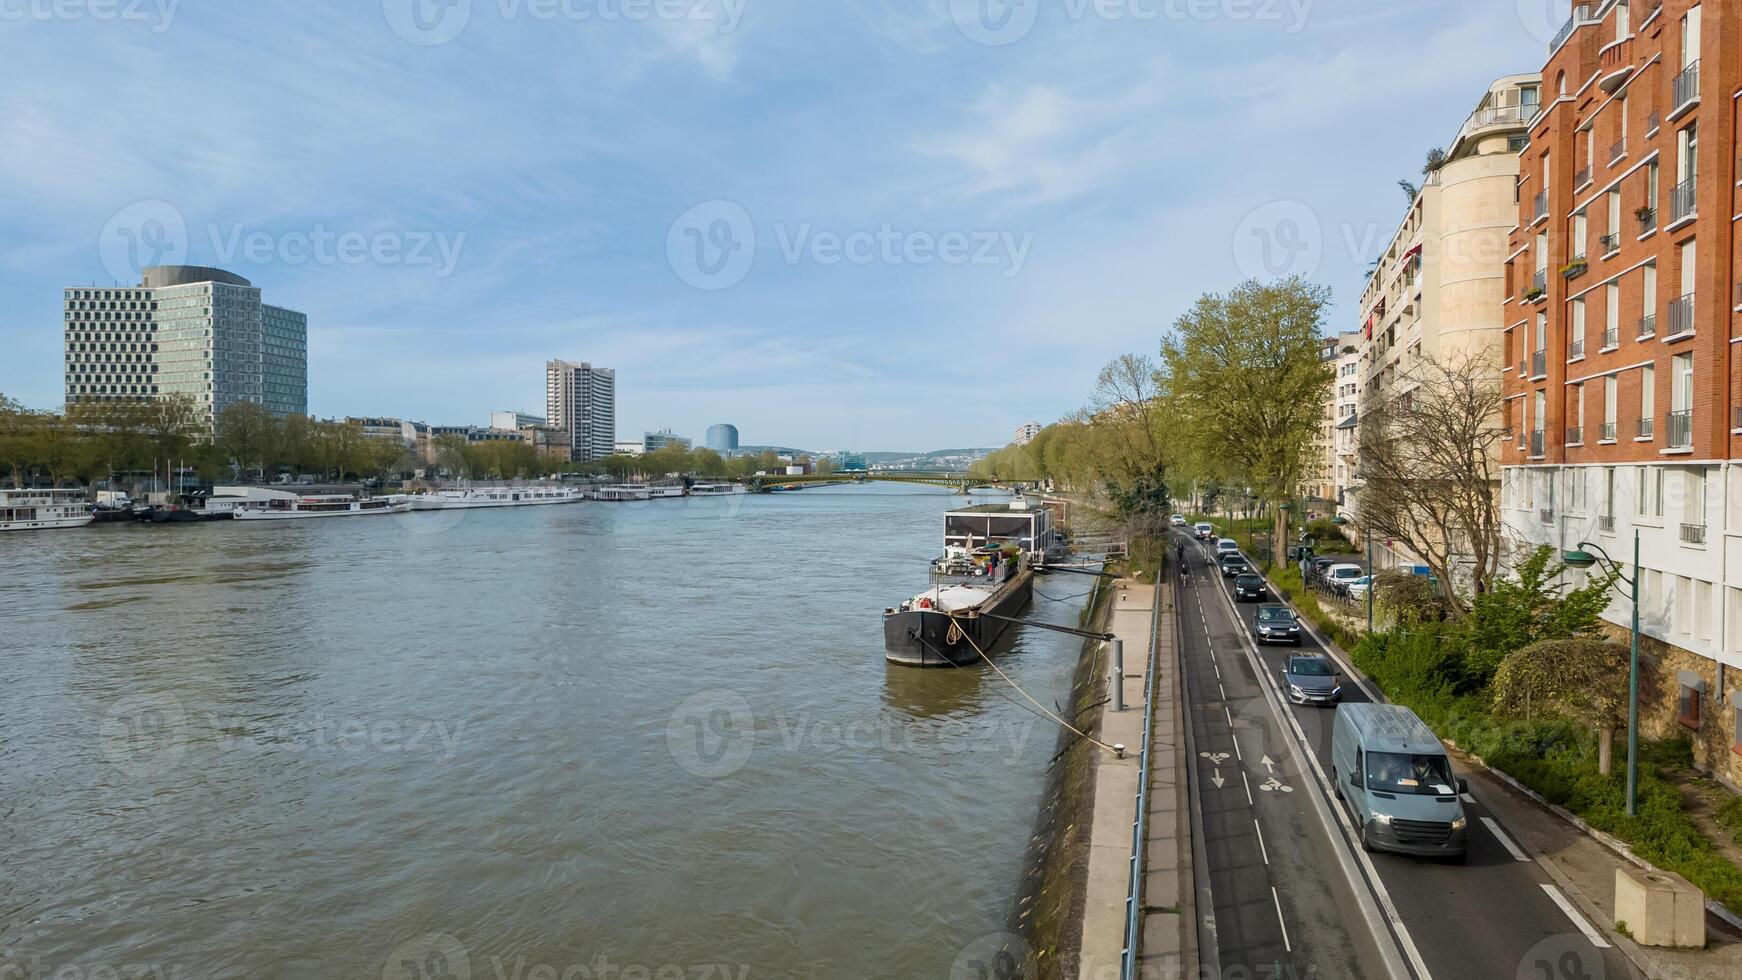 Panoramic view of urban riverfront with moored boats, promenade, and modern architecture on a clear day, ideal for travel and urban planning concepts photo